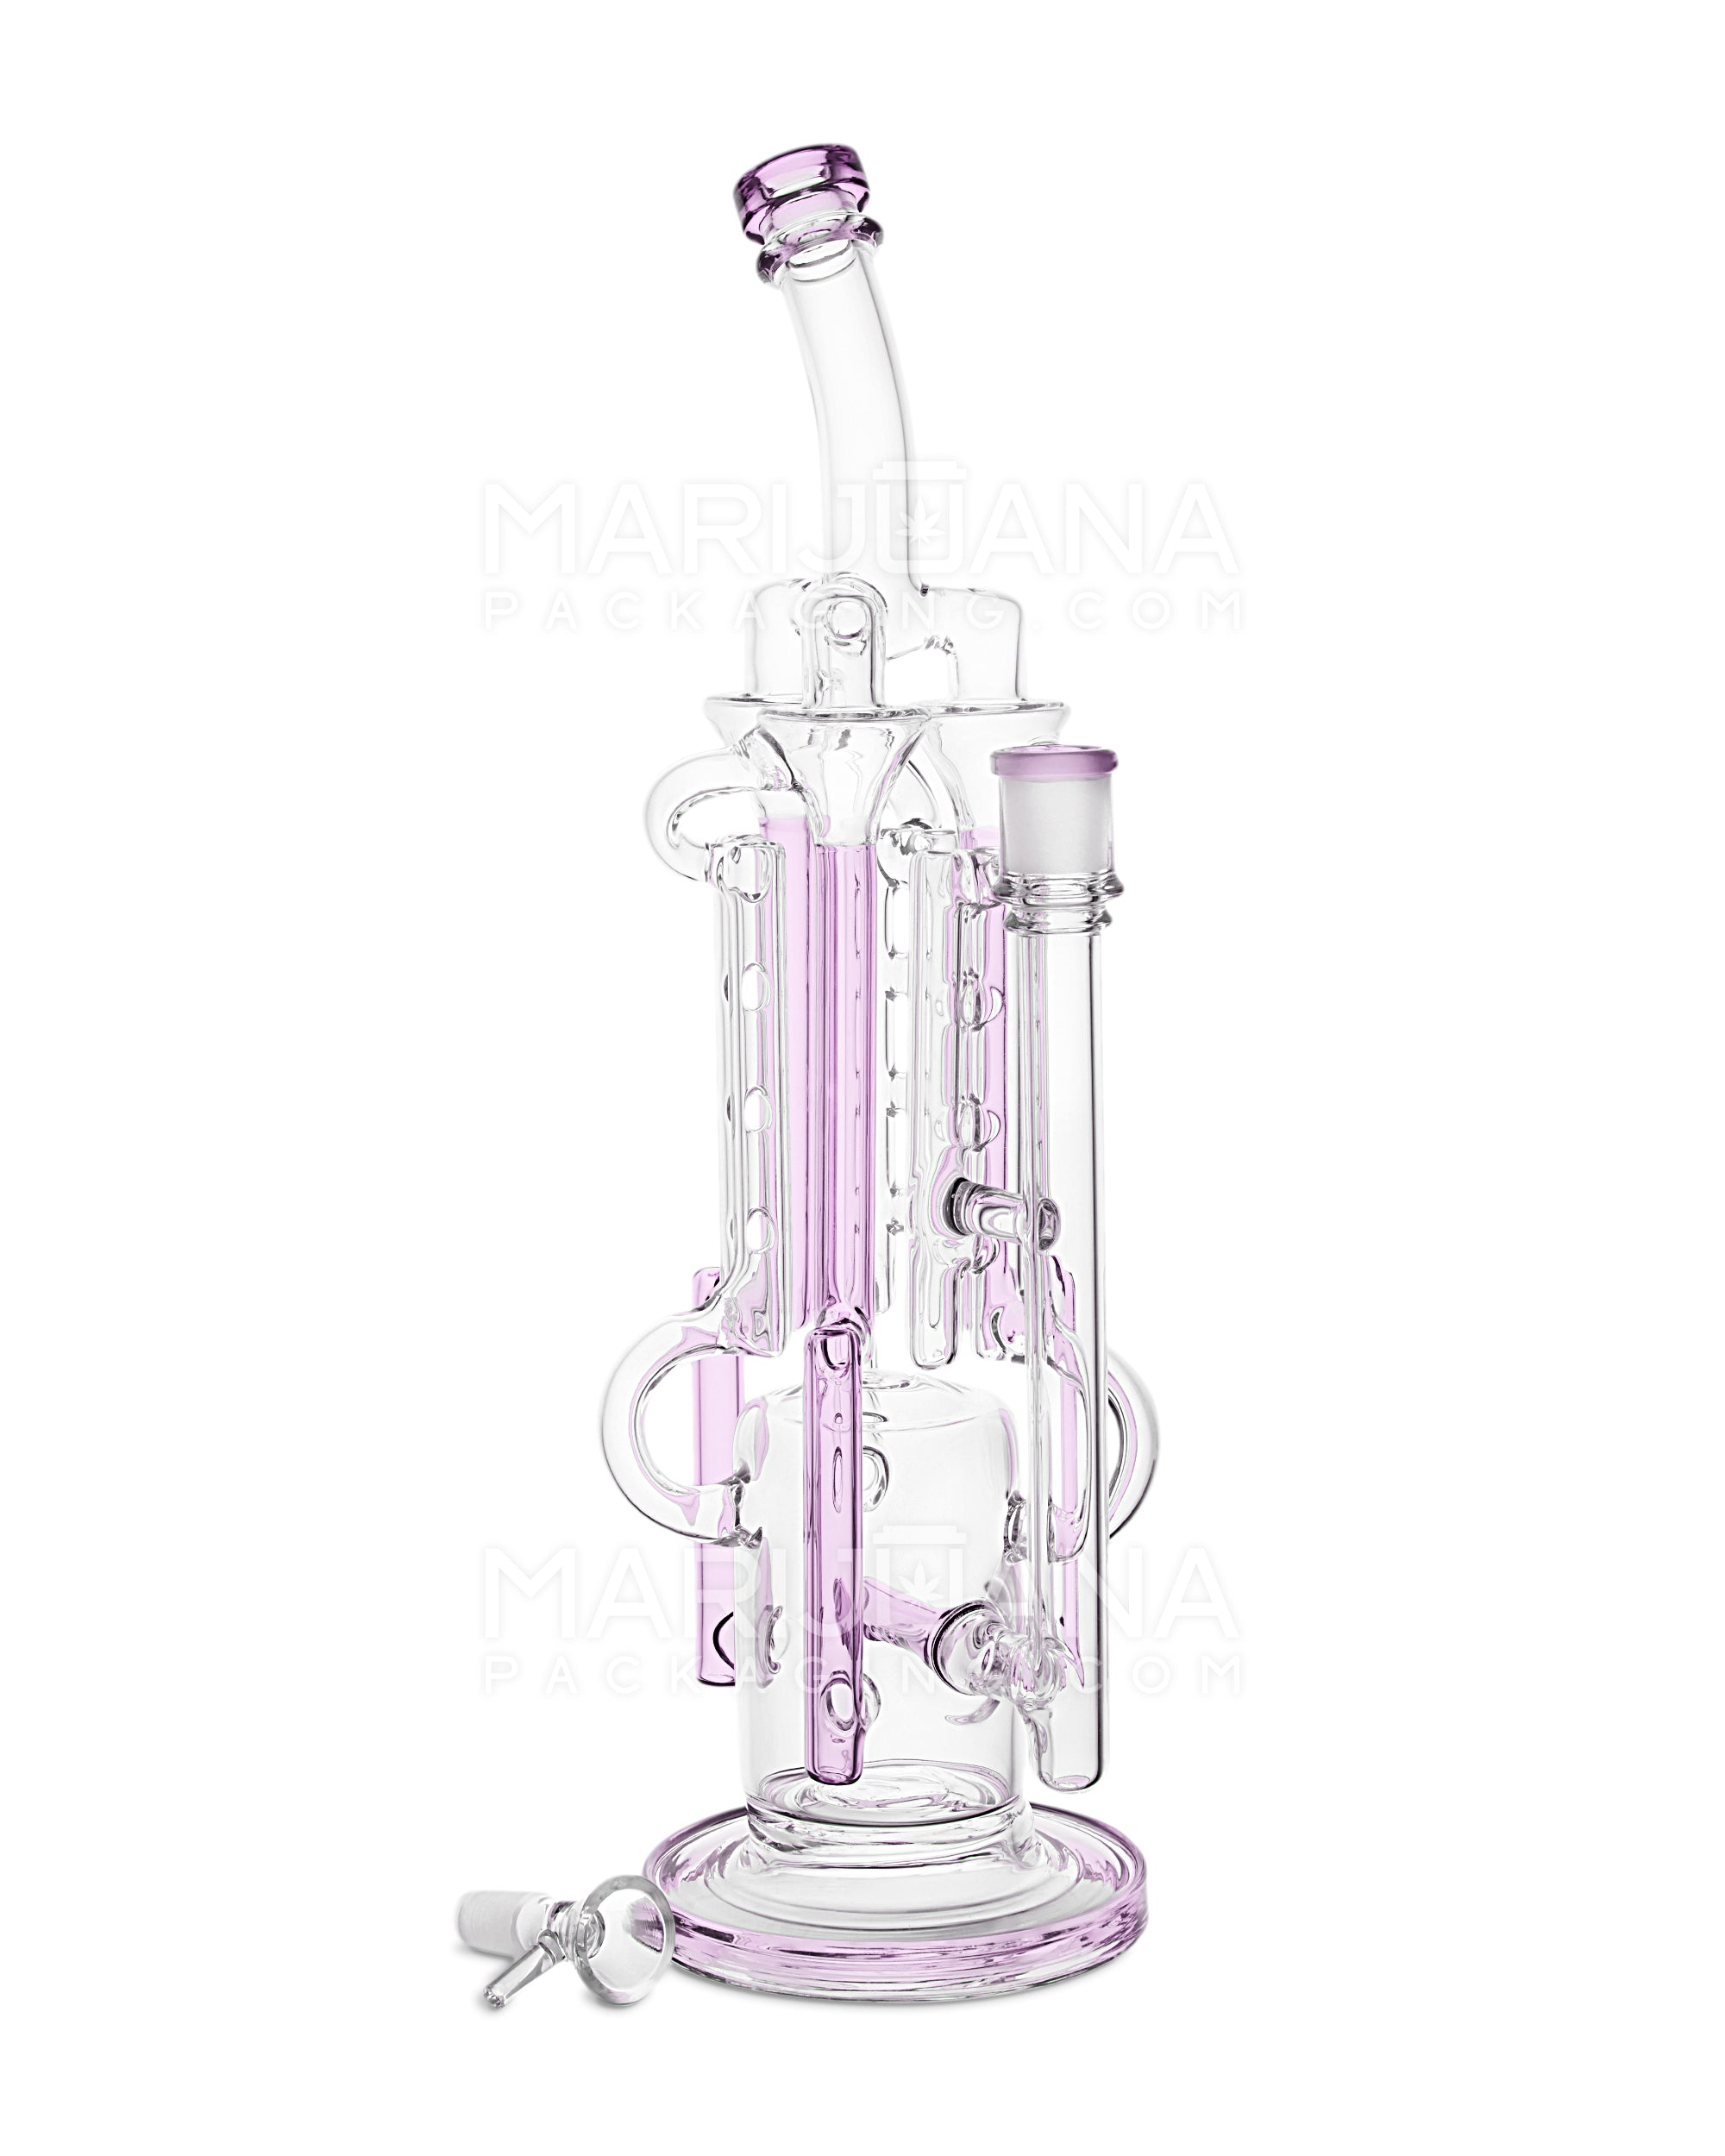 USA Glass | Bent Neck Inline Perc Six Recycler Pillar Tower Water Pipe w/ Thick Base | 14.5in Tall - 14mm Bowl - Pink